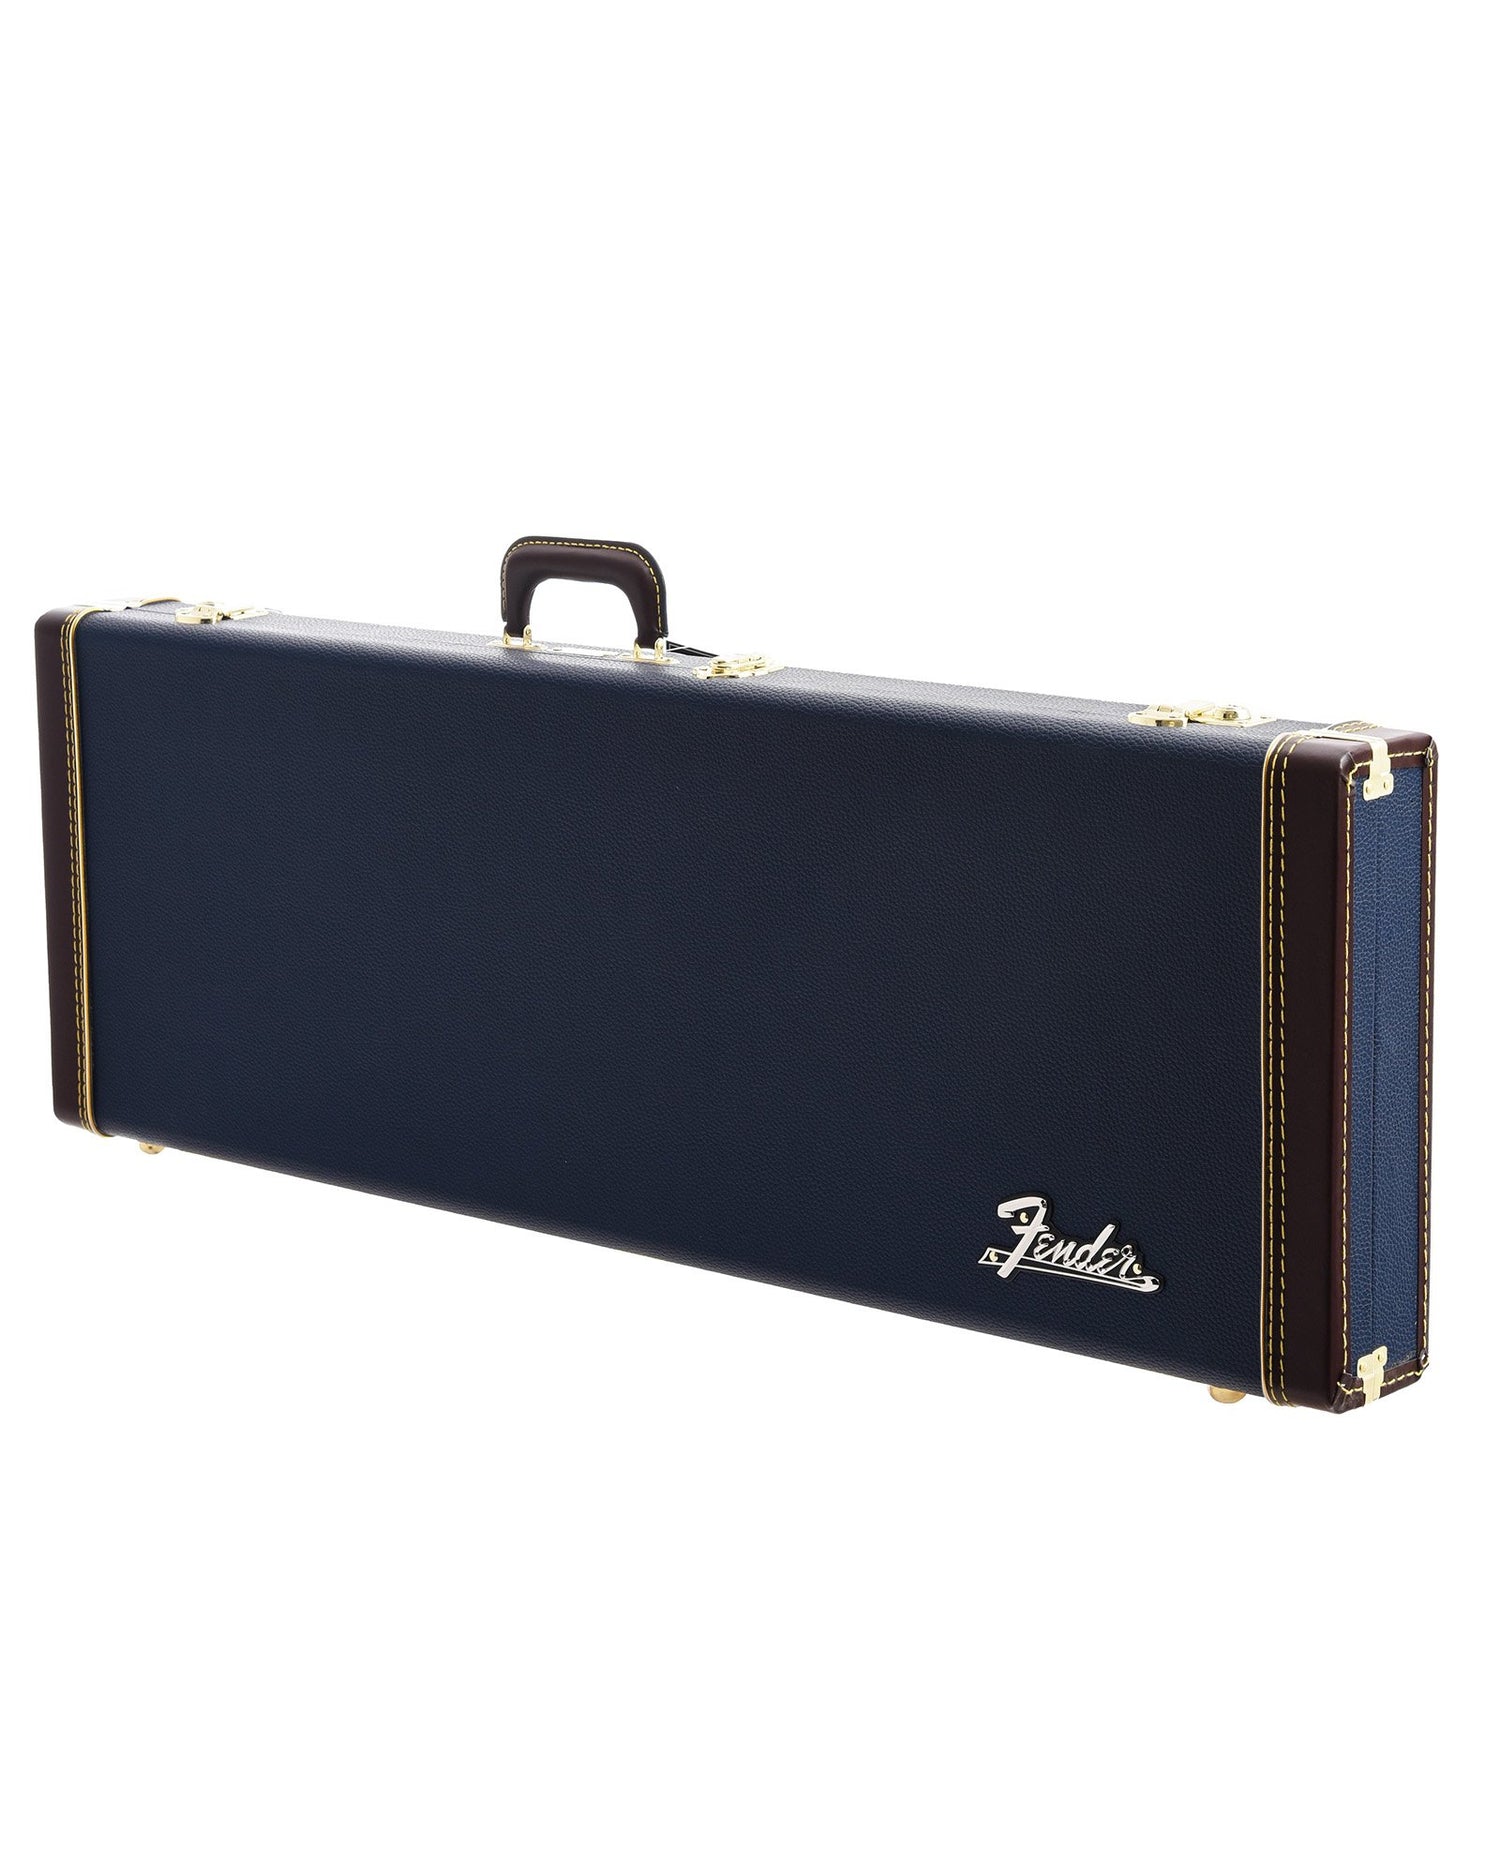 Image 1 of Fender Classic Series Navy Blue Wooden Case, Strat/Tele - SKU# FCSNBWC-S/T : Product Type Accessories & Parts : Elderly Instruments